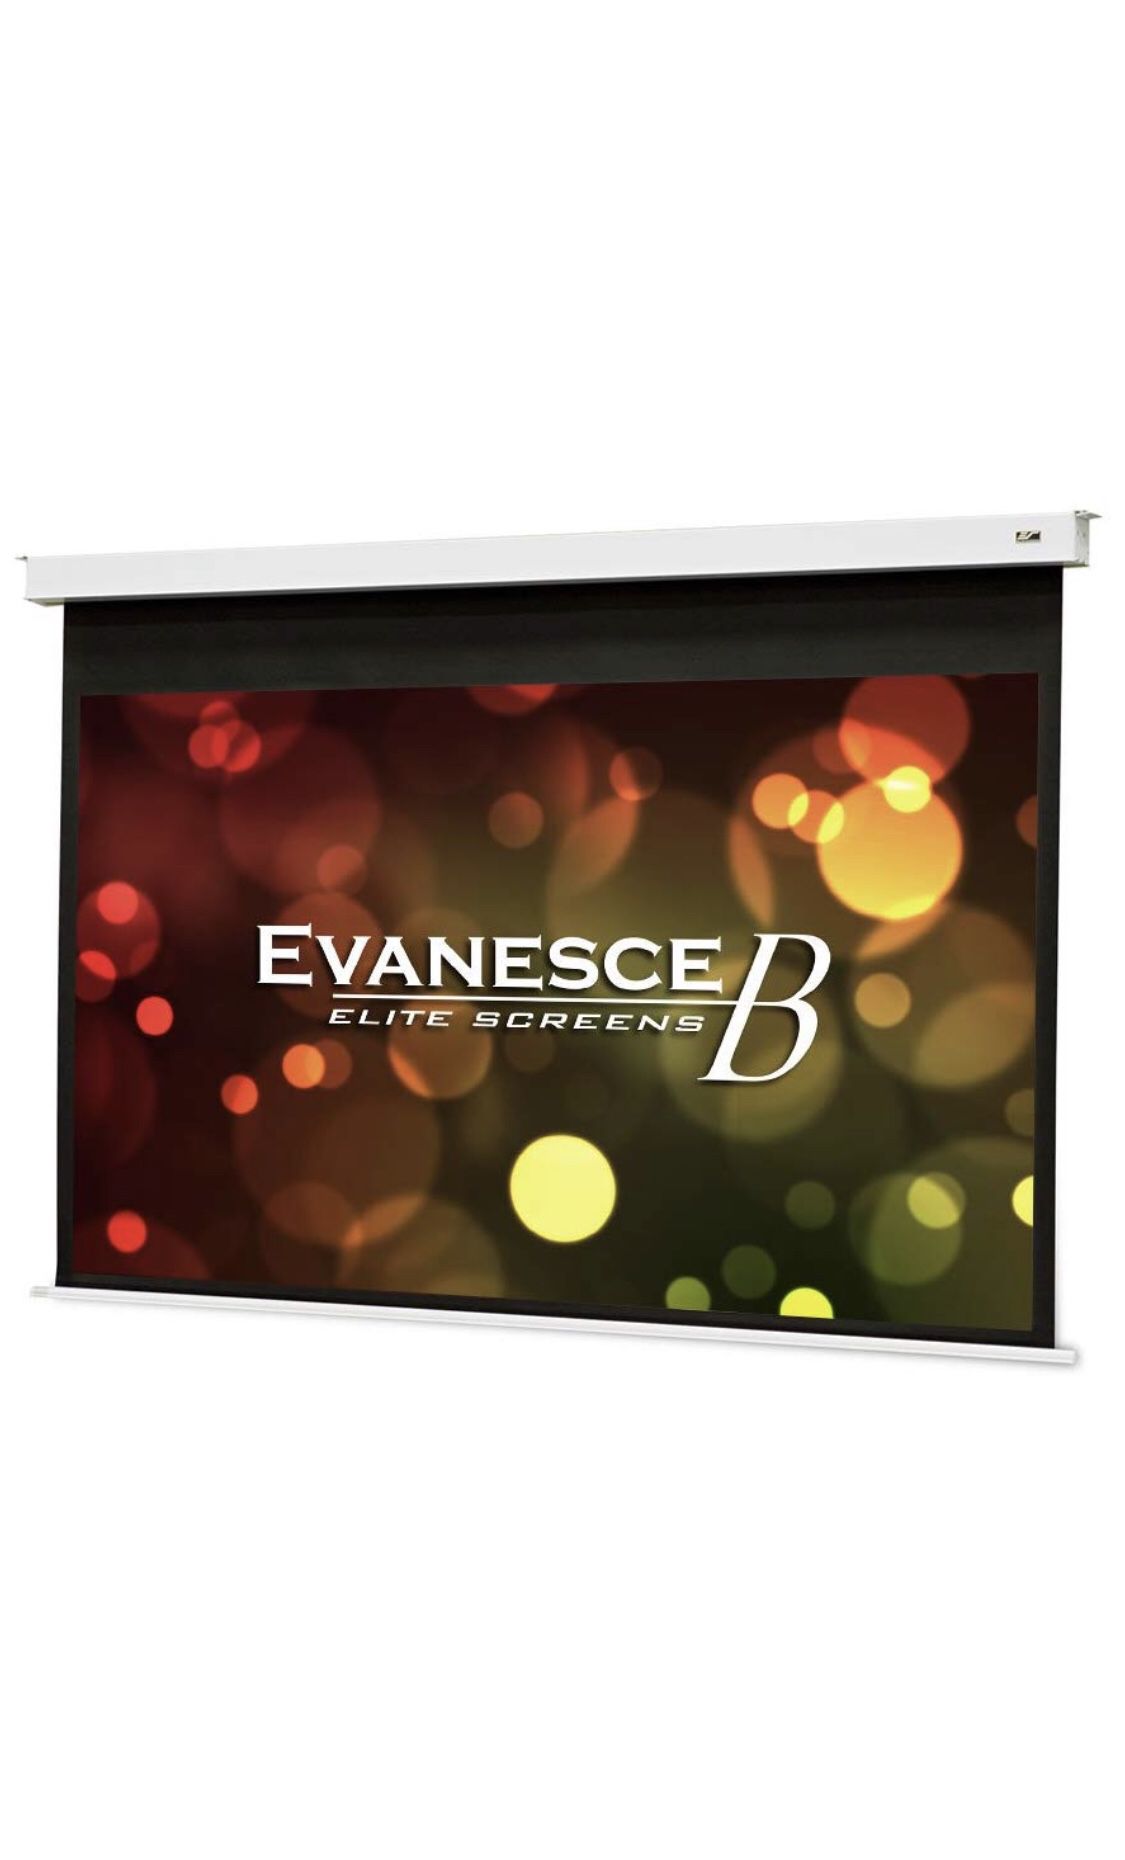 BraBrand new Elite Screens Evanesce B, 110" 16:9, Recessed in-Ceiling Electric Projector Screen